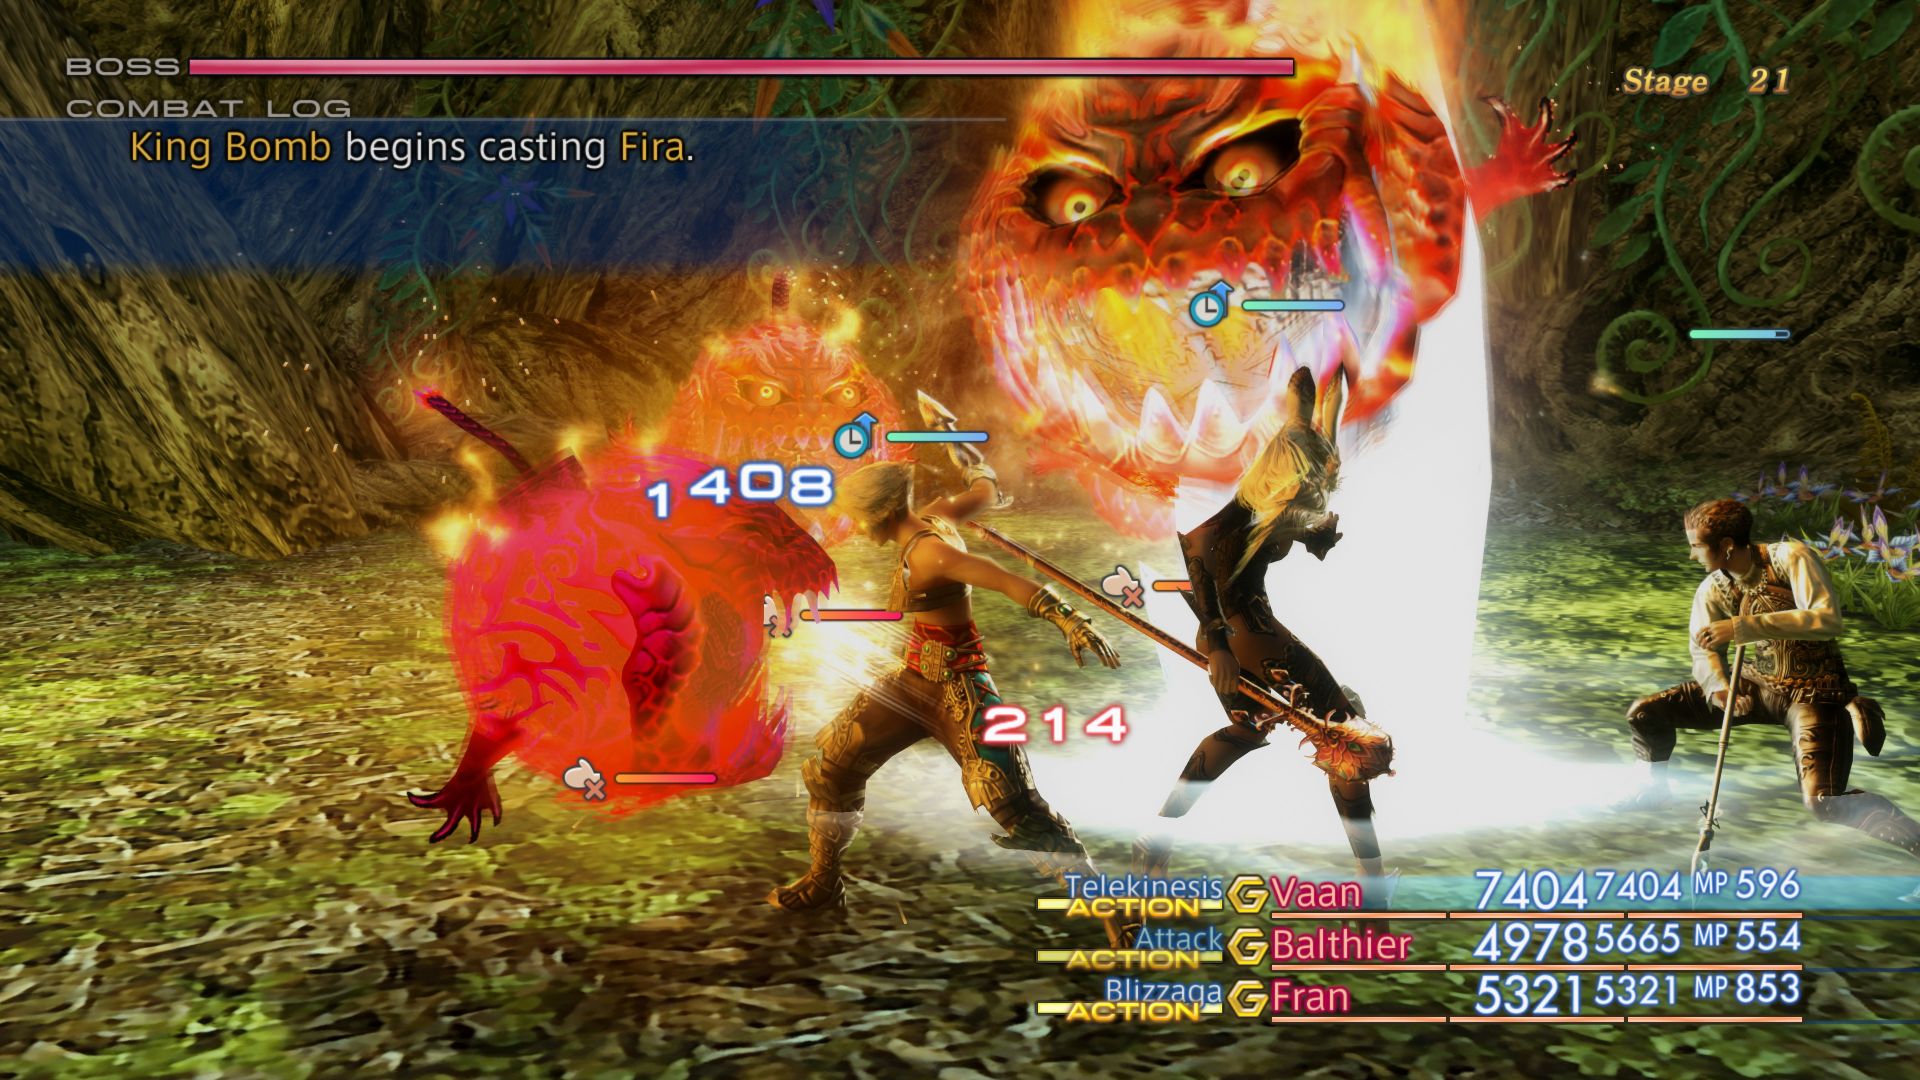 Best JRPGs - In Final Fantasy 12, the King Bomb boss enemy prepares its fire magic.